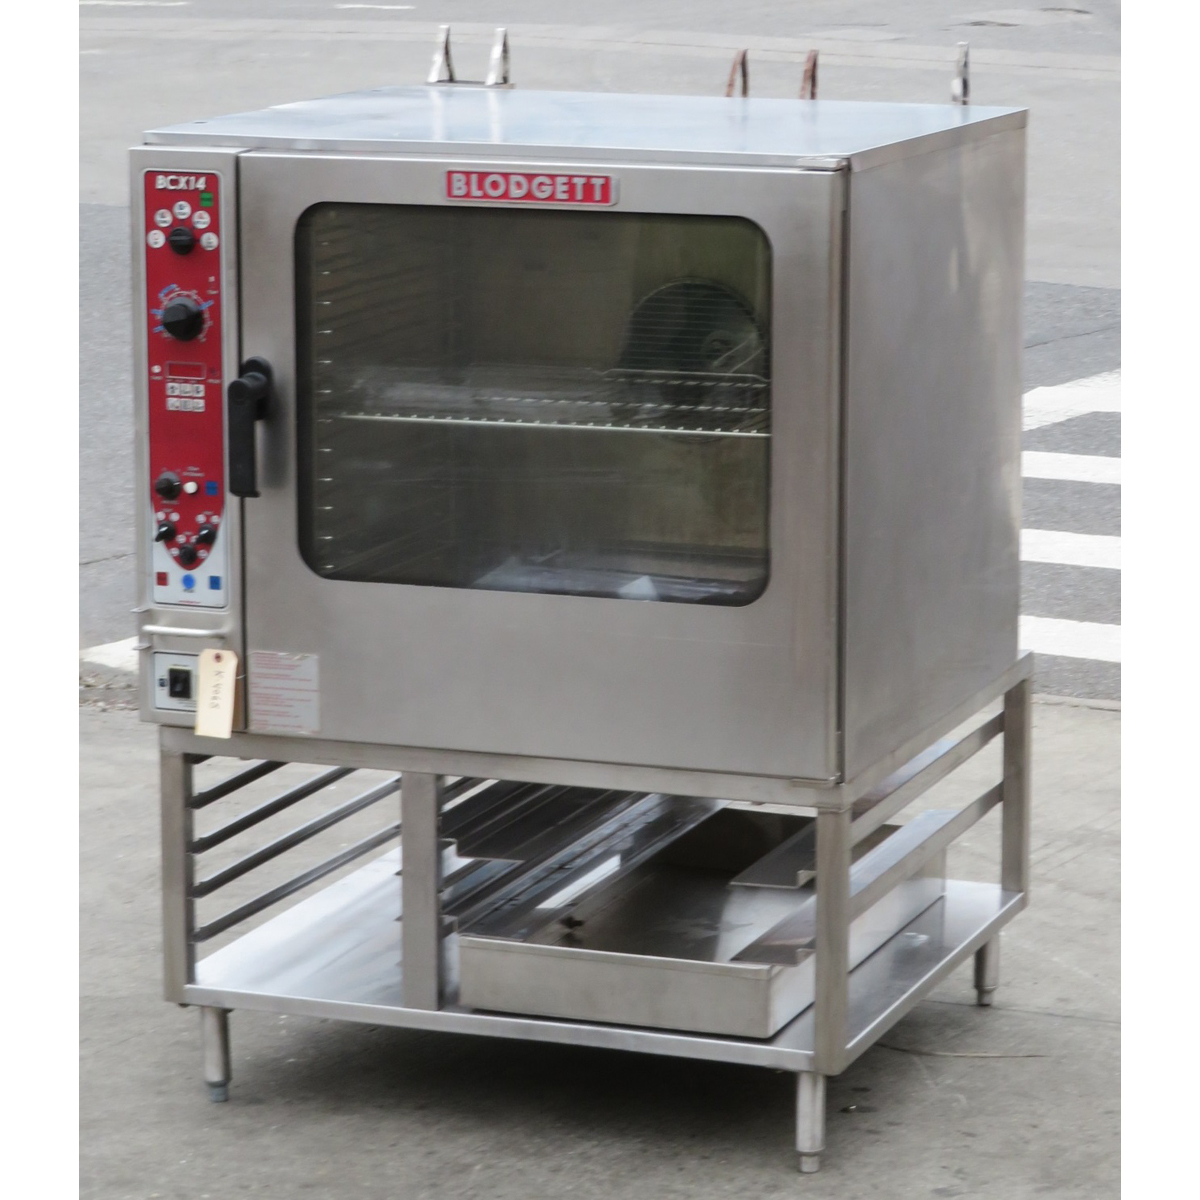 Blodgett BCX14 Combi Oven Natrual Gas, Used Excellent Condition